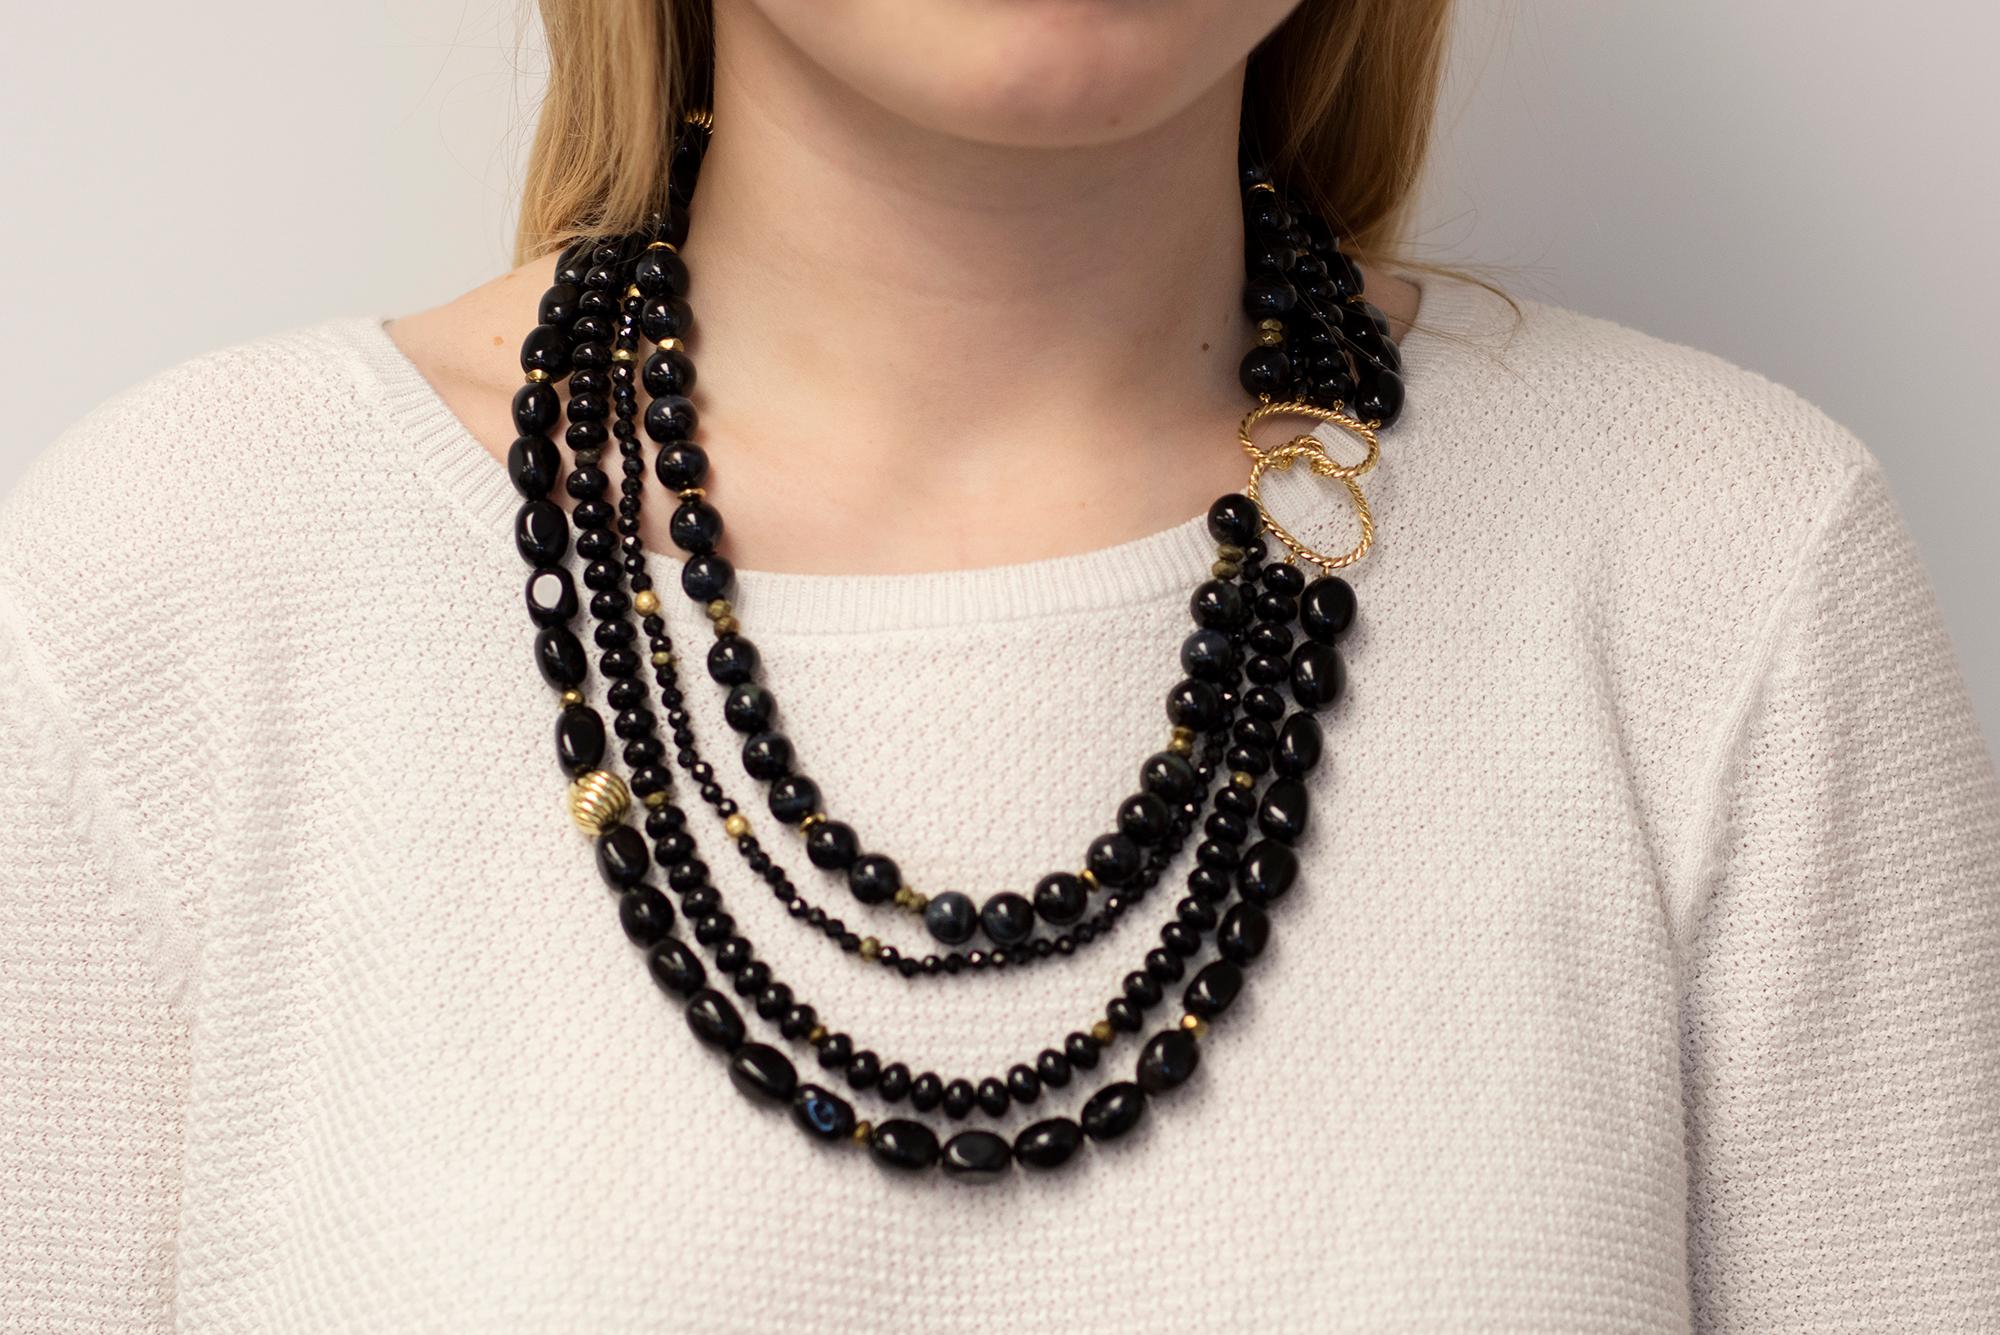 David Yurman Couture 18 Karat Yellow Gold Black Onyx and Obsidian Bead Necklace In Excellent Condition For Sale In Nashua, NH